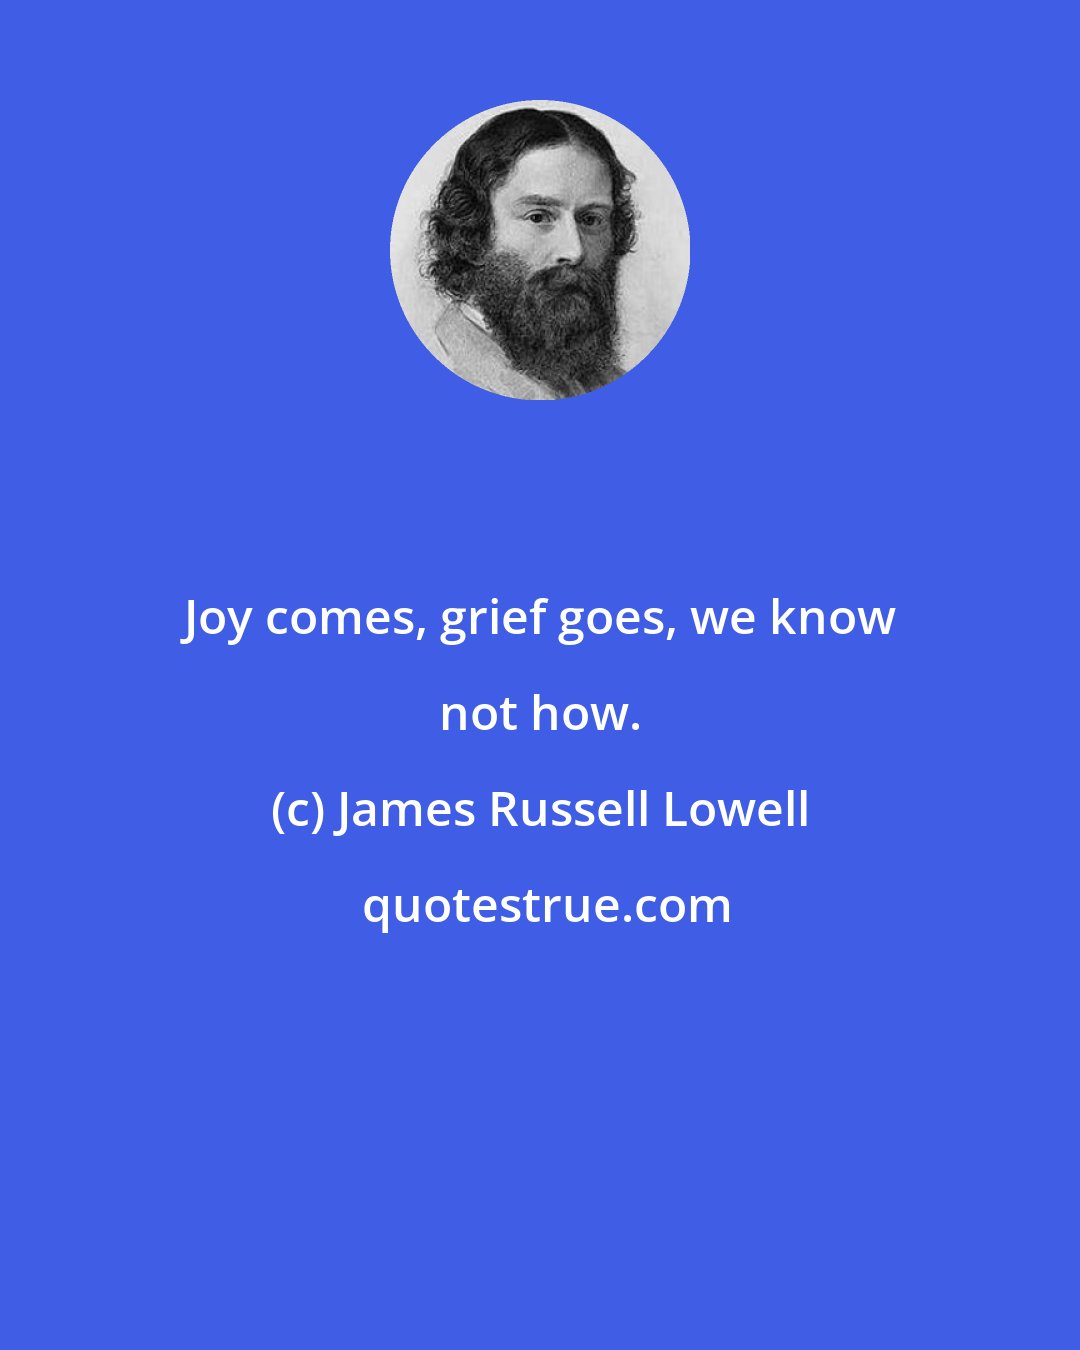 James Russell Lowell: Joy comes, grief goes, we know not how.